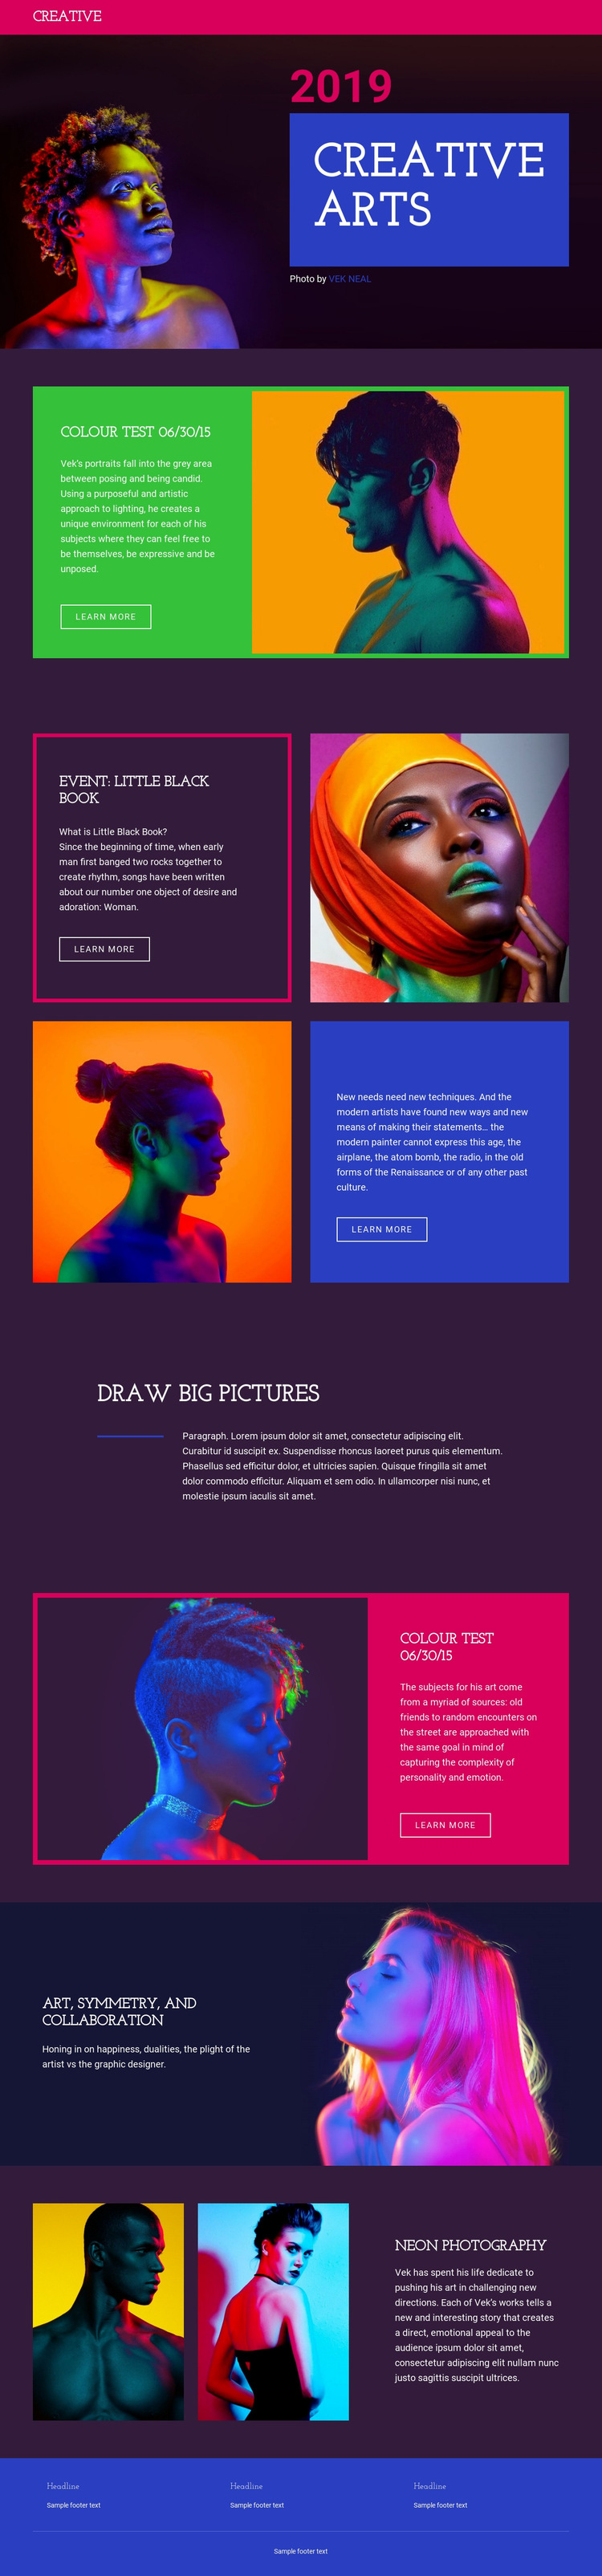 Limited-edition photography HTML5 Template